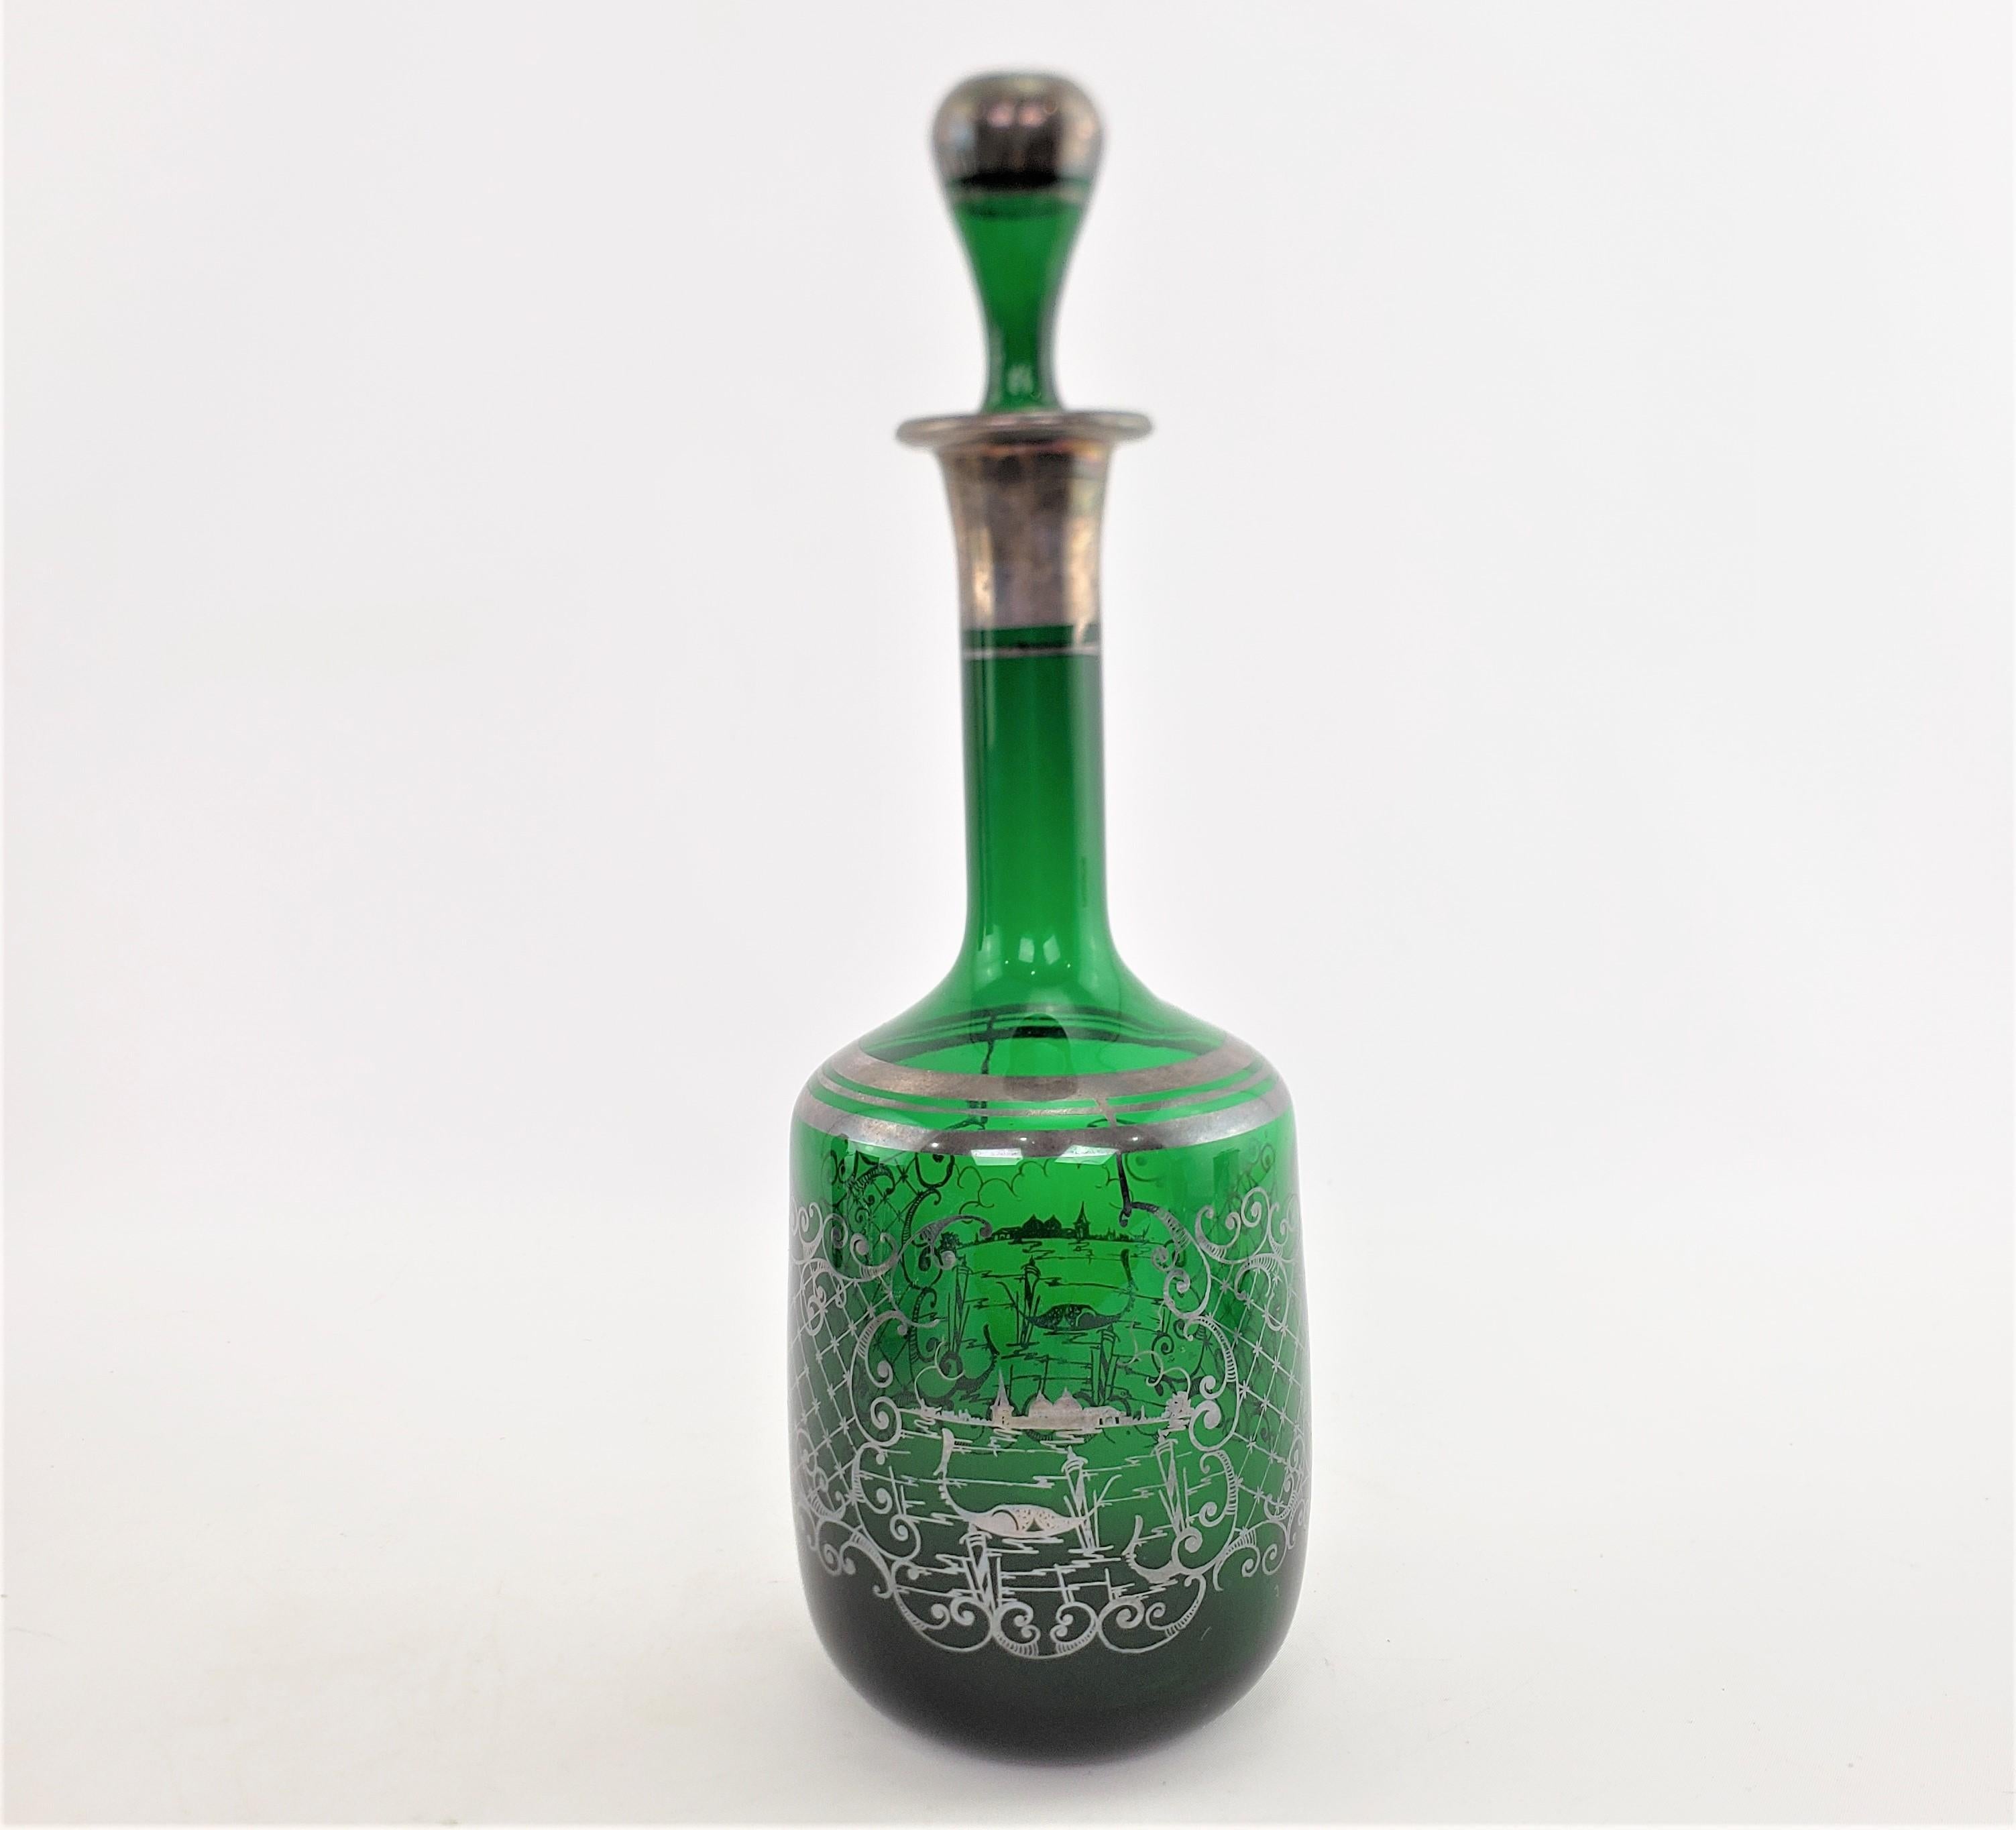 Silvered Antique Deep Green Bottle Decanter with Silver Overlay Swan & Pond Decoration